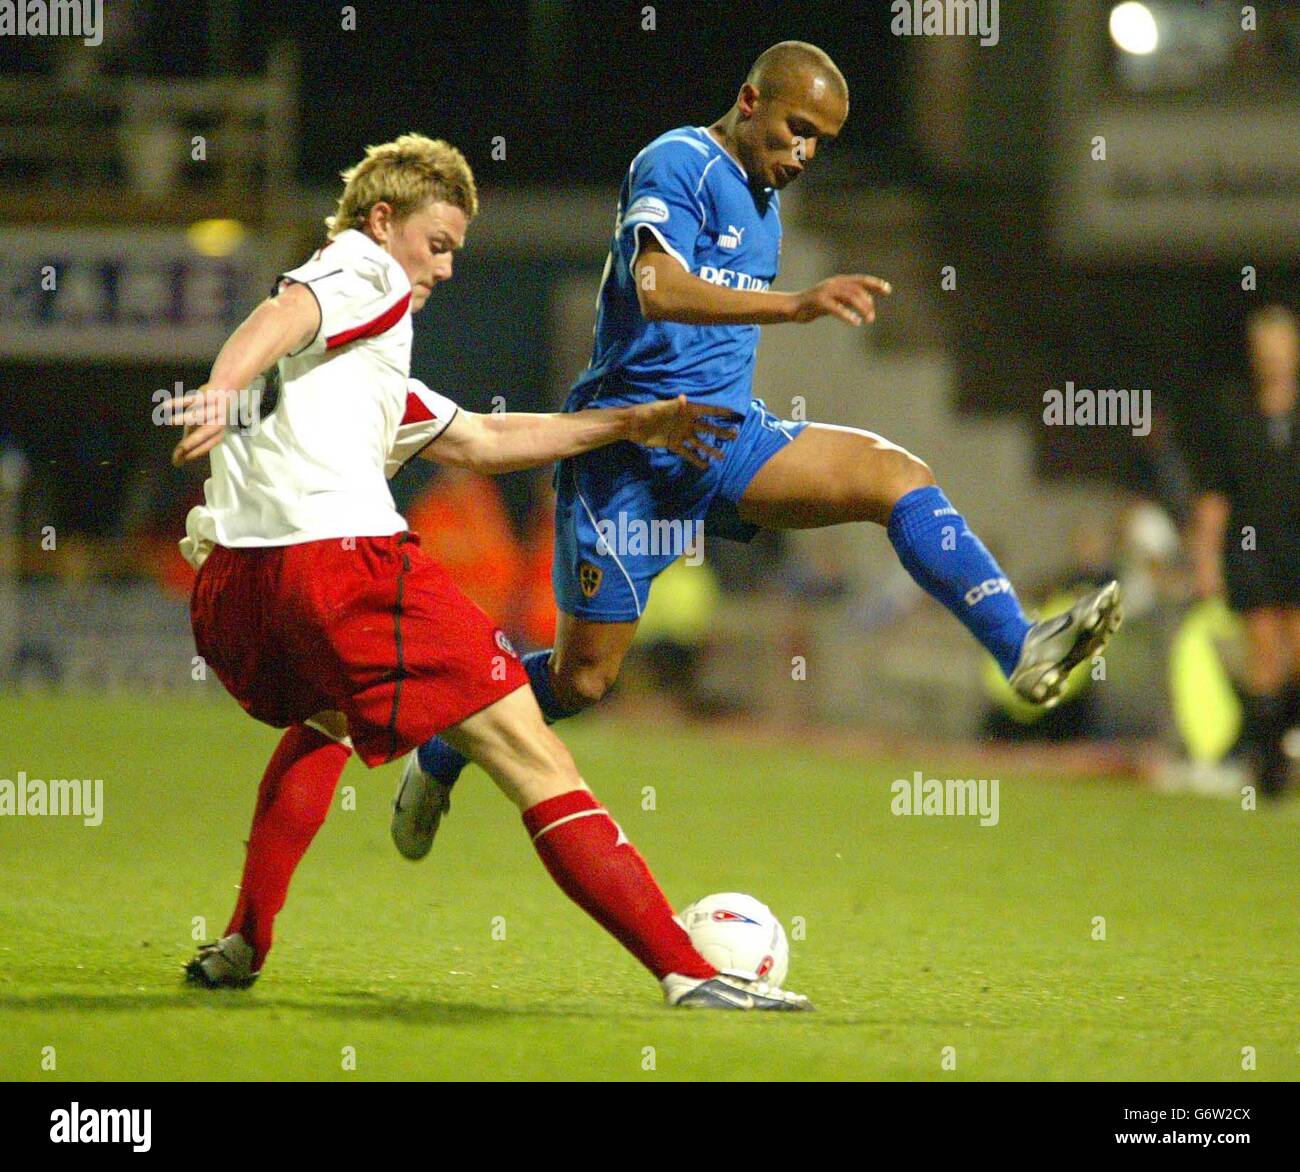 Cardiff's Robert Earnshaw is beaten to the ball by Sheffield United Simon Francis during the Nationwide Division One match at Ninian Park, Cardiff, Saturday March 27, 2004. NO UNOFFICIAL CLUB WEBSITE USE. Stock Photo